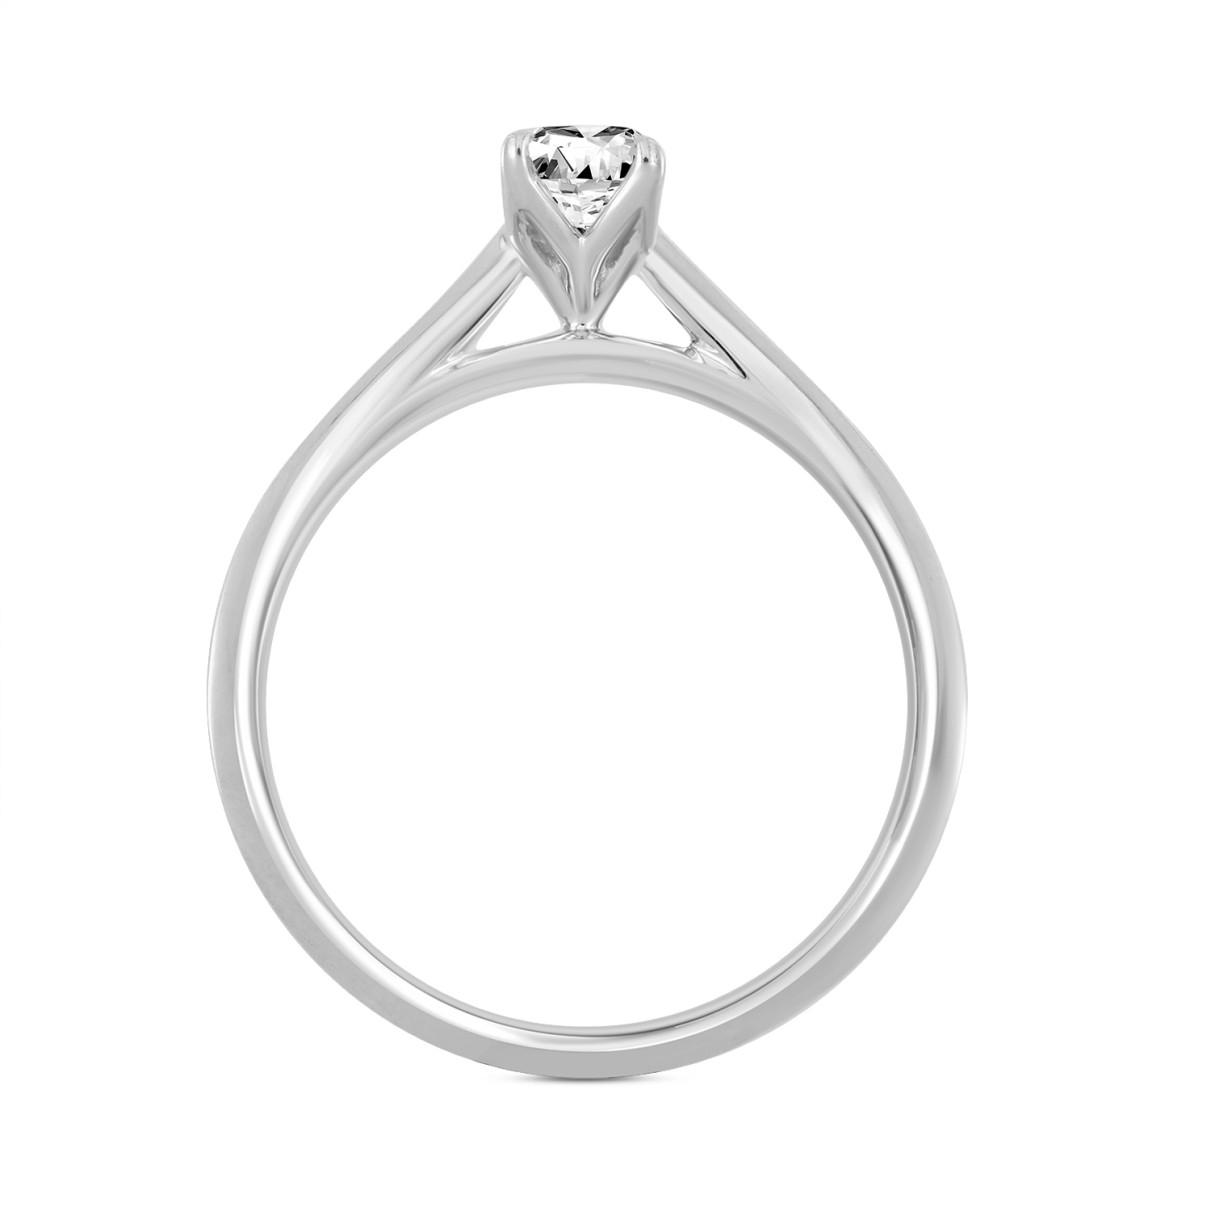 LADIES SOLITAIRE RING 1 1/2CT PEAR DIAMOND 14K WHITE GOLD